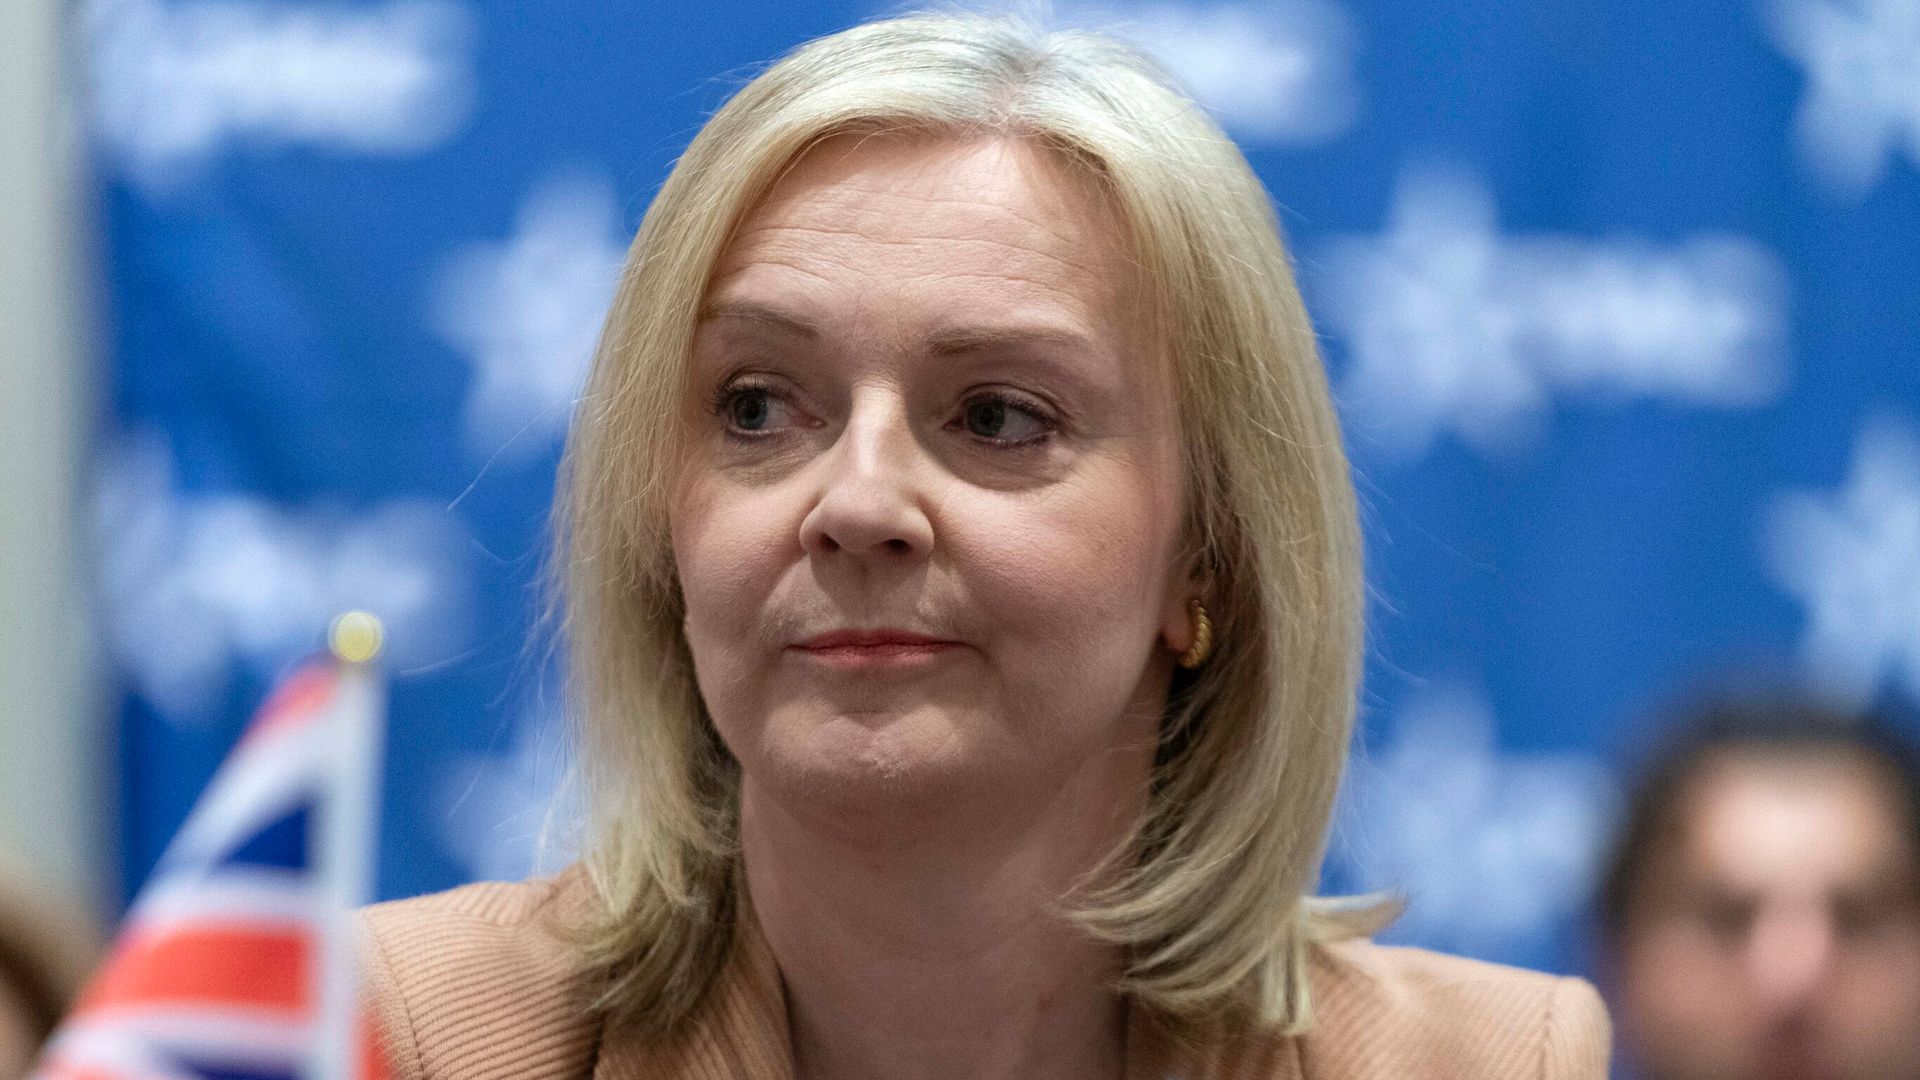 Truss refuses to apologise for sparking mortgage rate rise - but admits one failing as PM